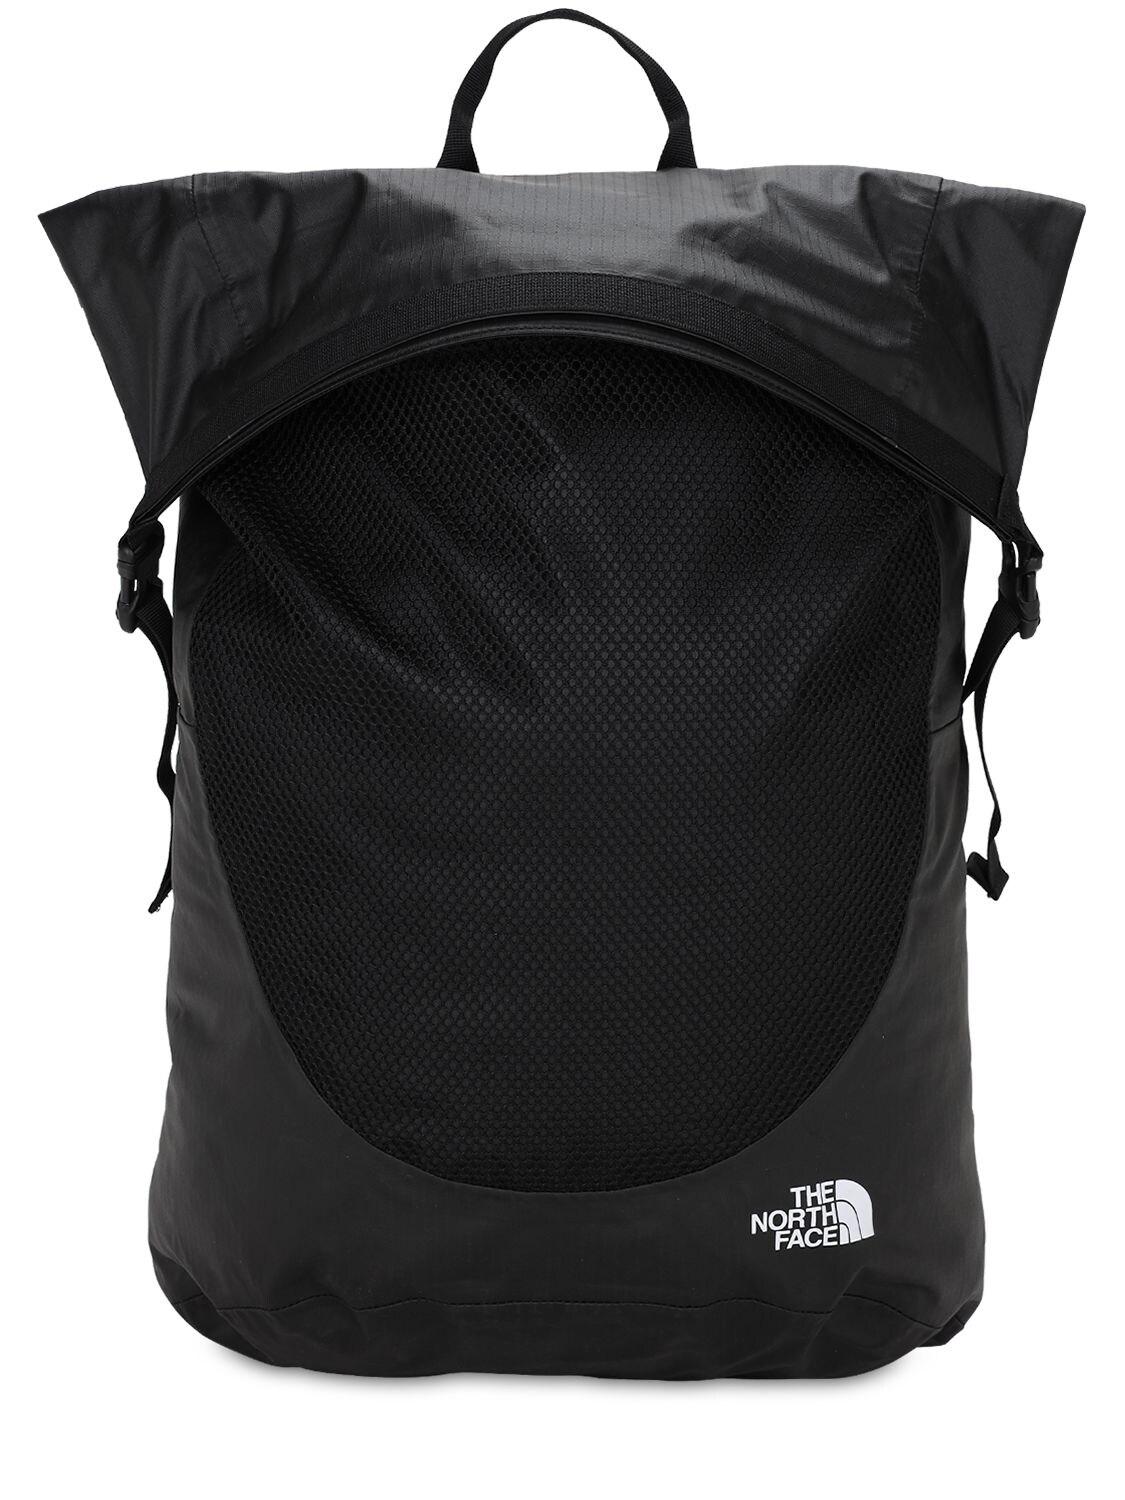 north face roll top bag,Quality assurance,protein-burger.com